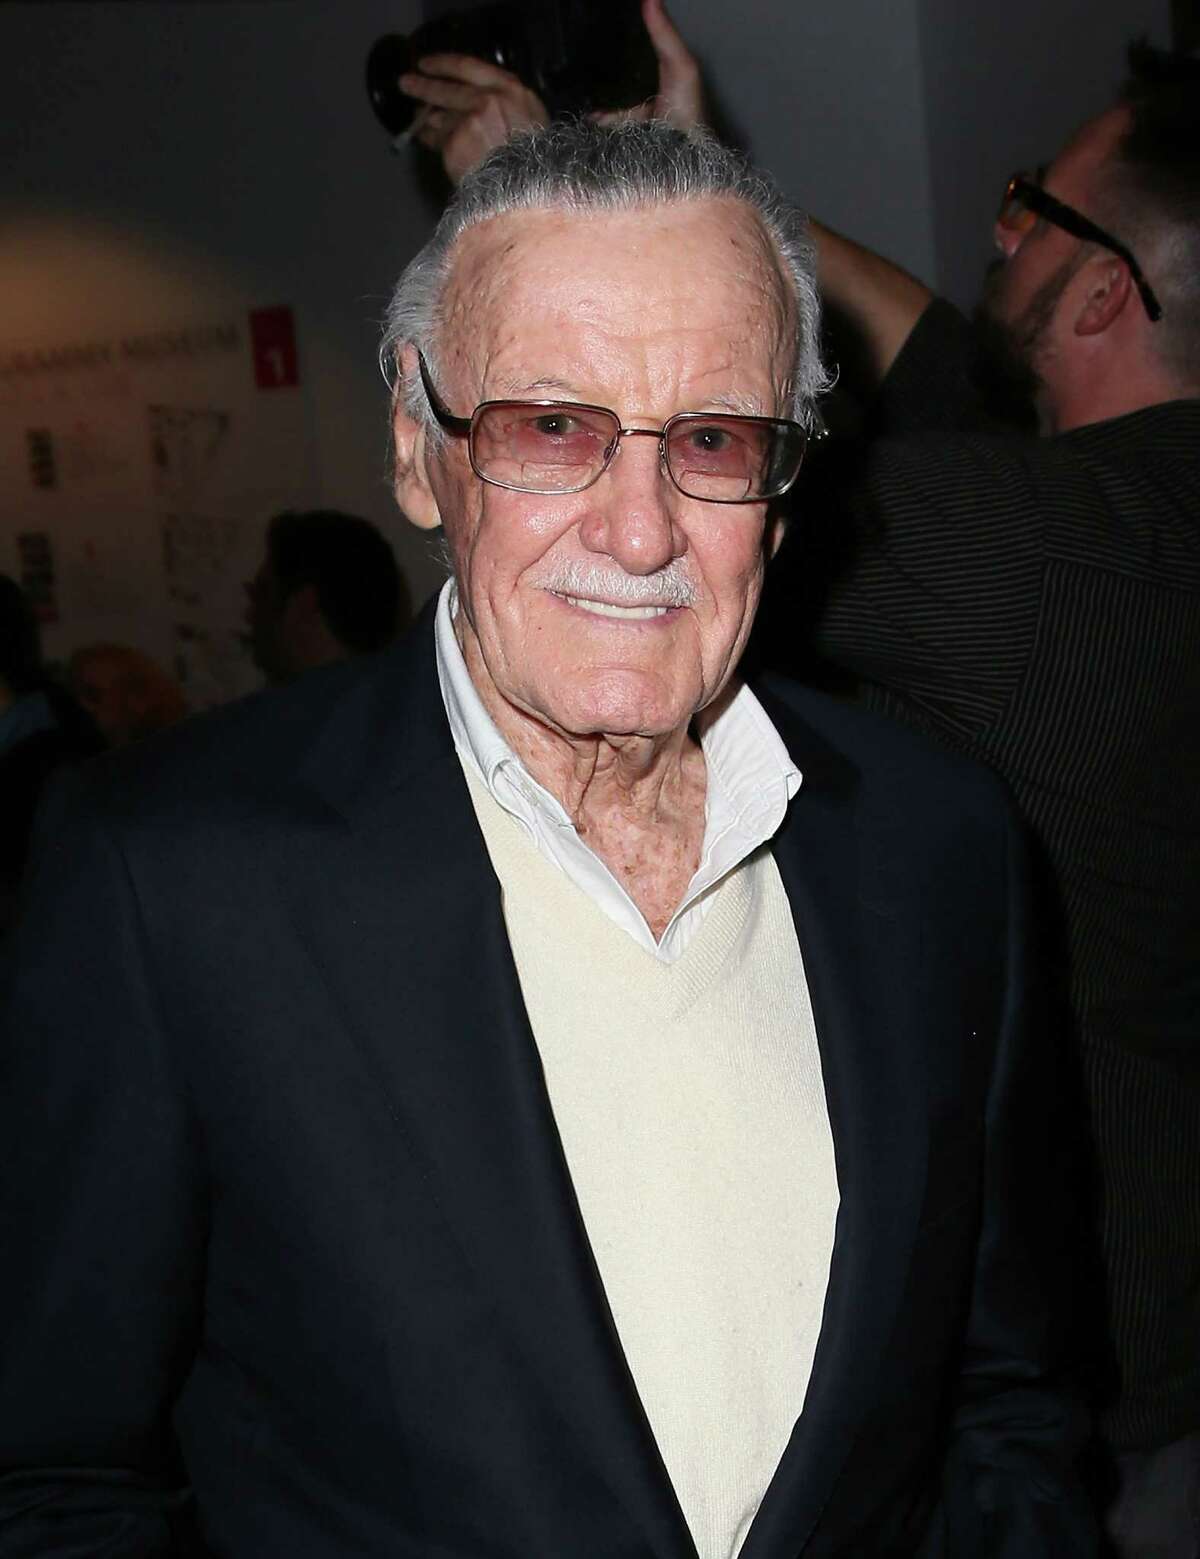 LOS ANGELES, CA - FEBRUARY 19: Comic book writer Stan Lee attends the Yoshiki performance and exhibit launch event at The GRAMMY Museum on February 19, 2014 in Los Angeles, California. (Photo by David Livingston/Getty Images)